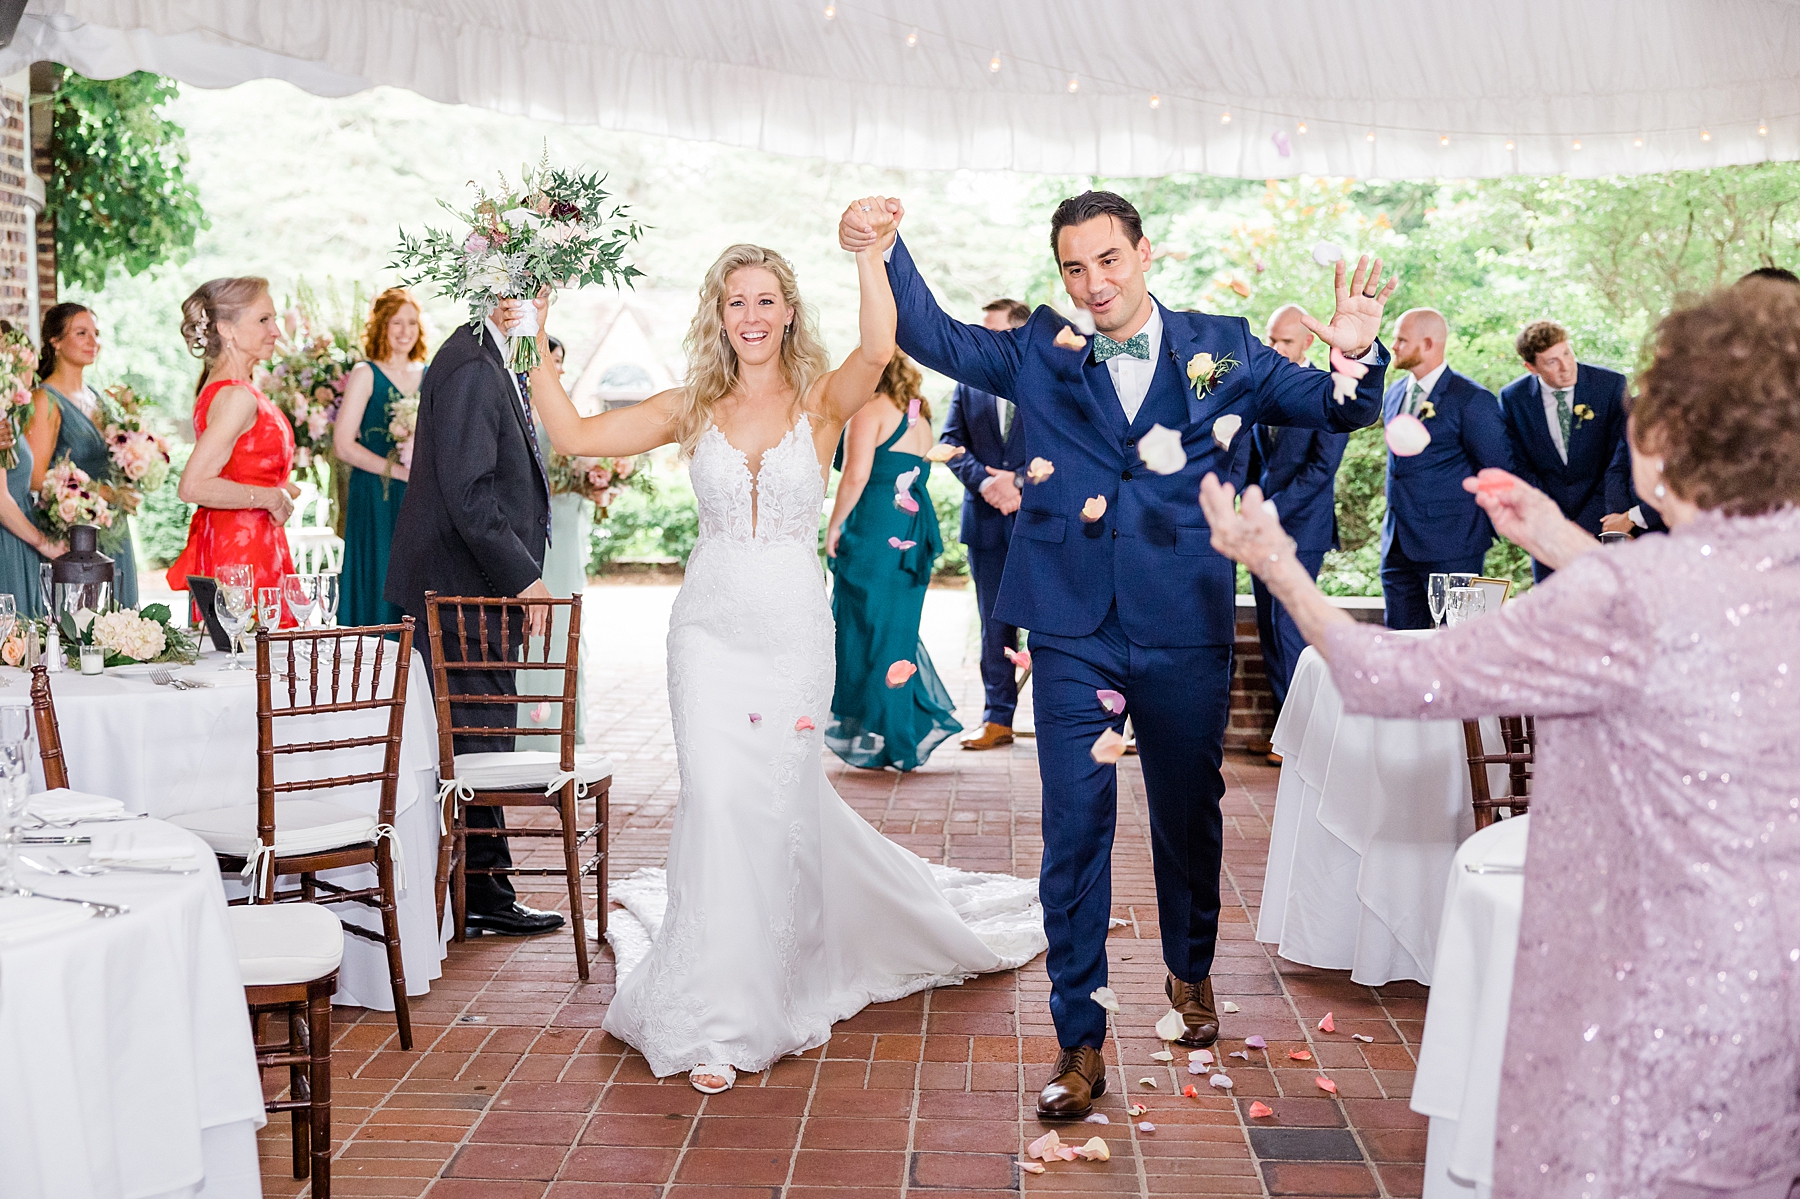 newlyweds exit ceremony as guests toss flower petals